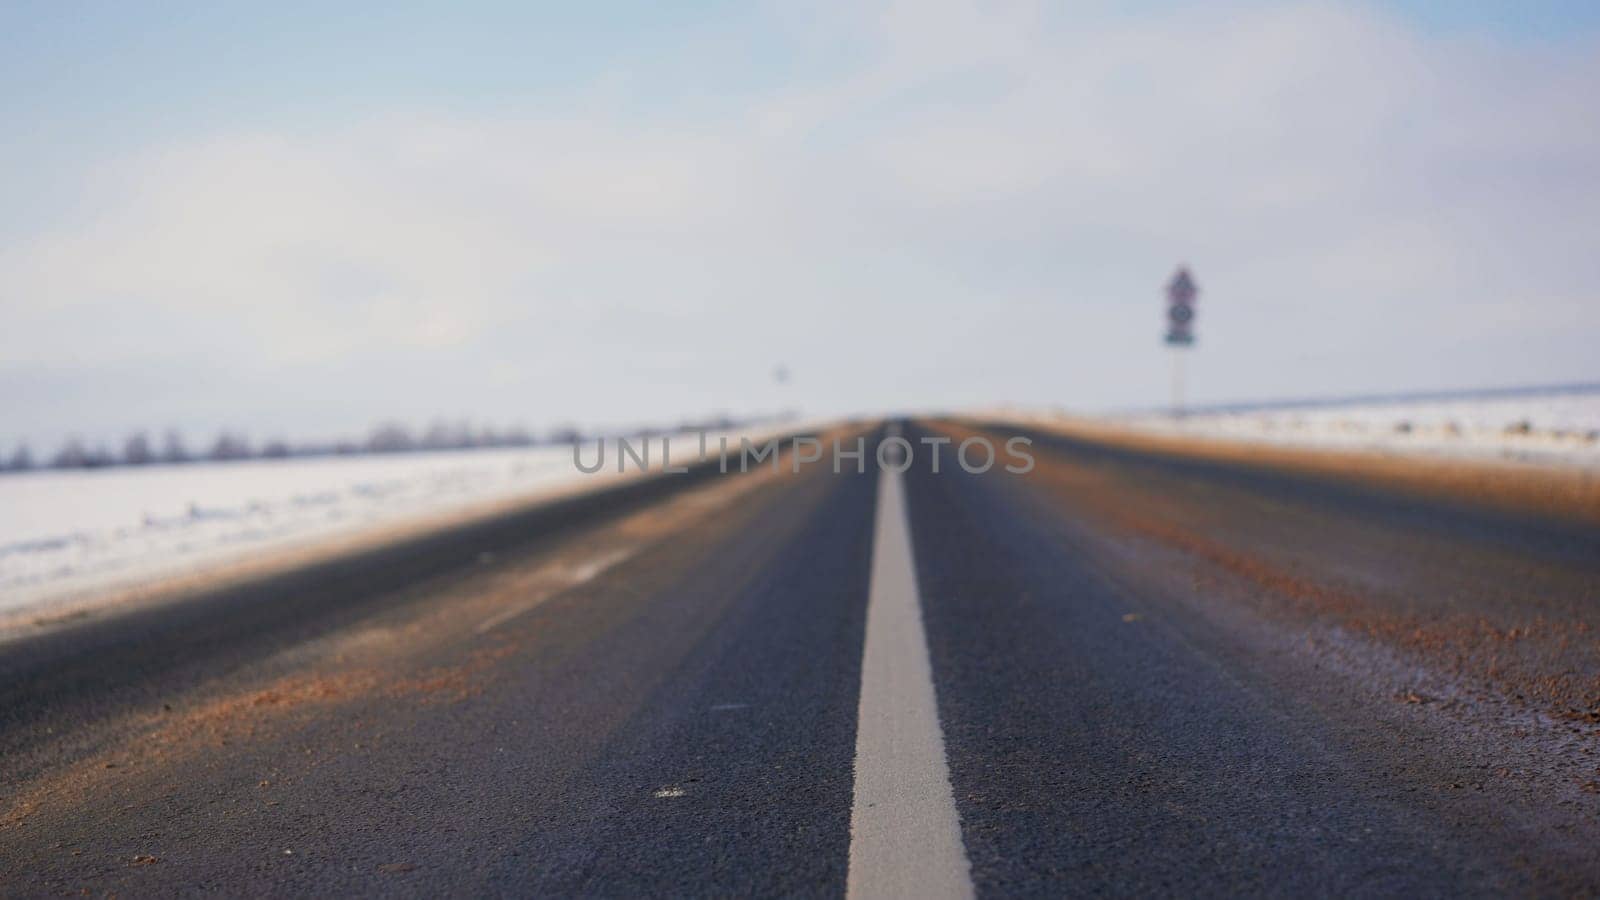 Asphalt in winter. Winter background of the foreground of the road with white markings.